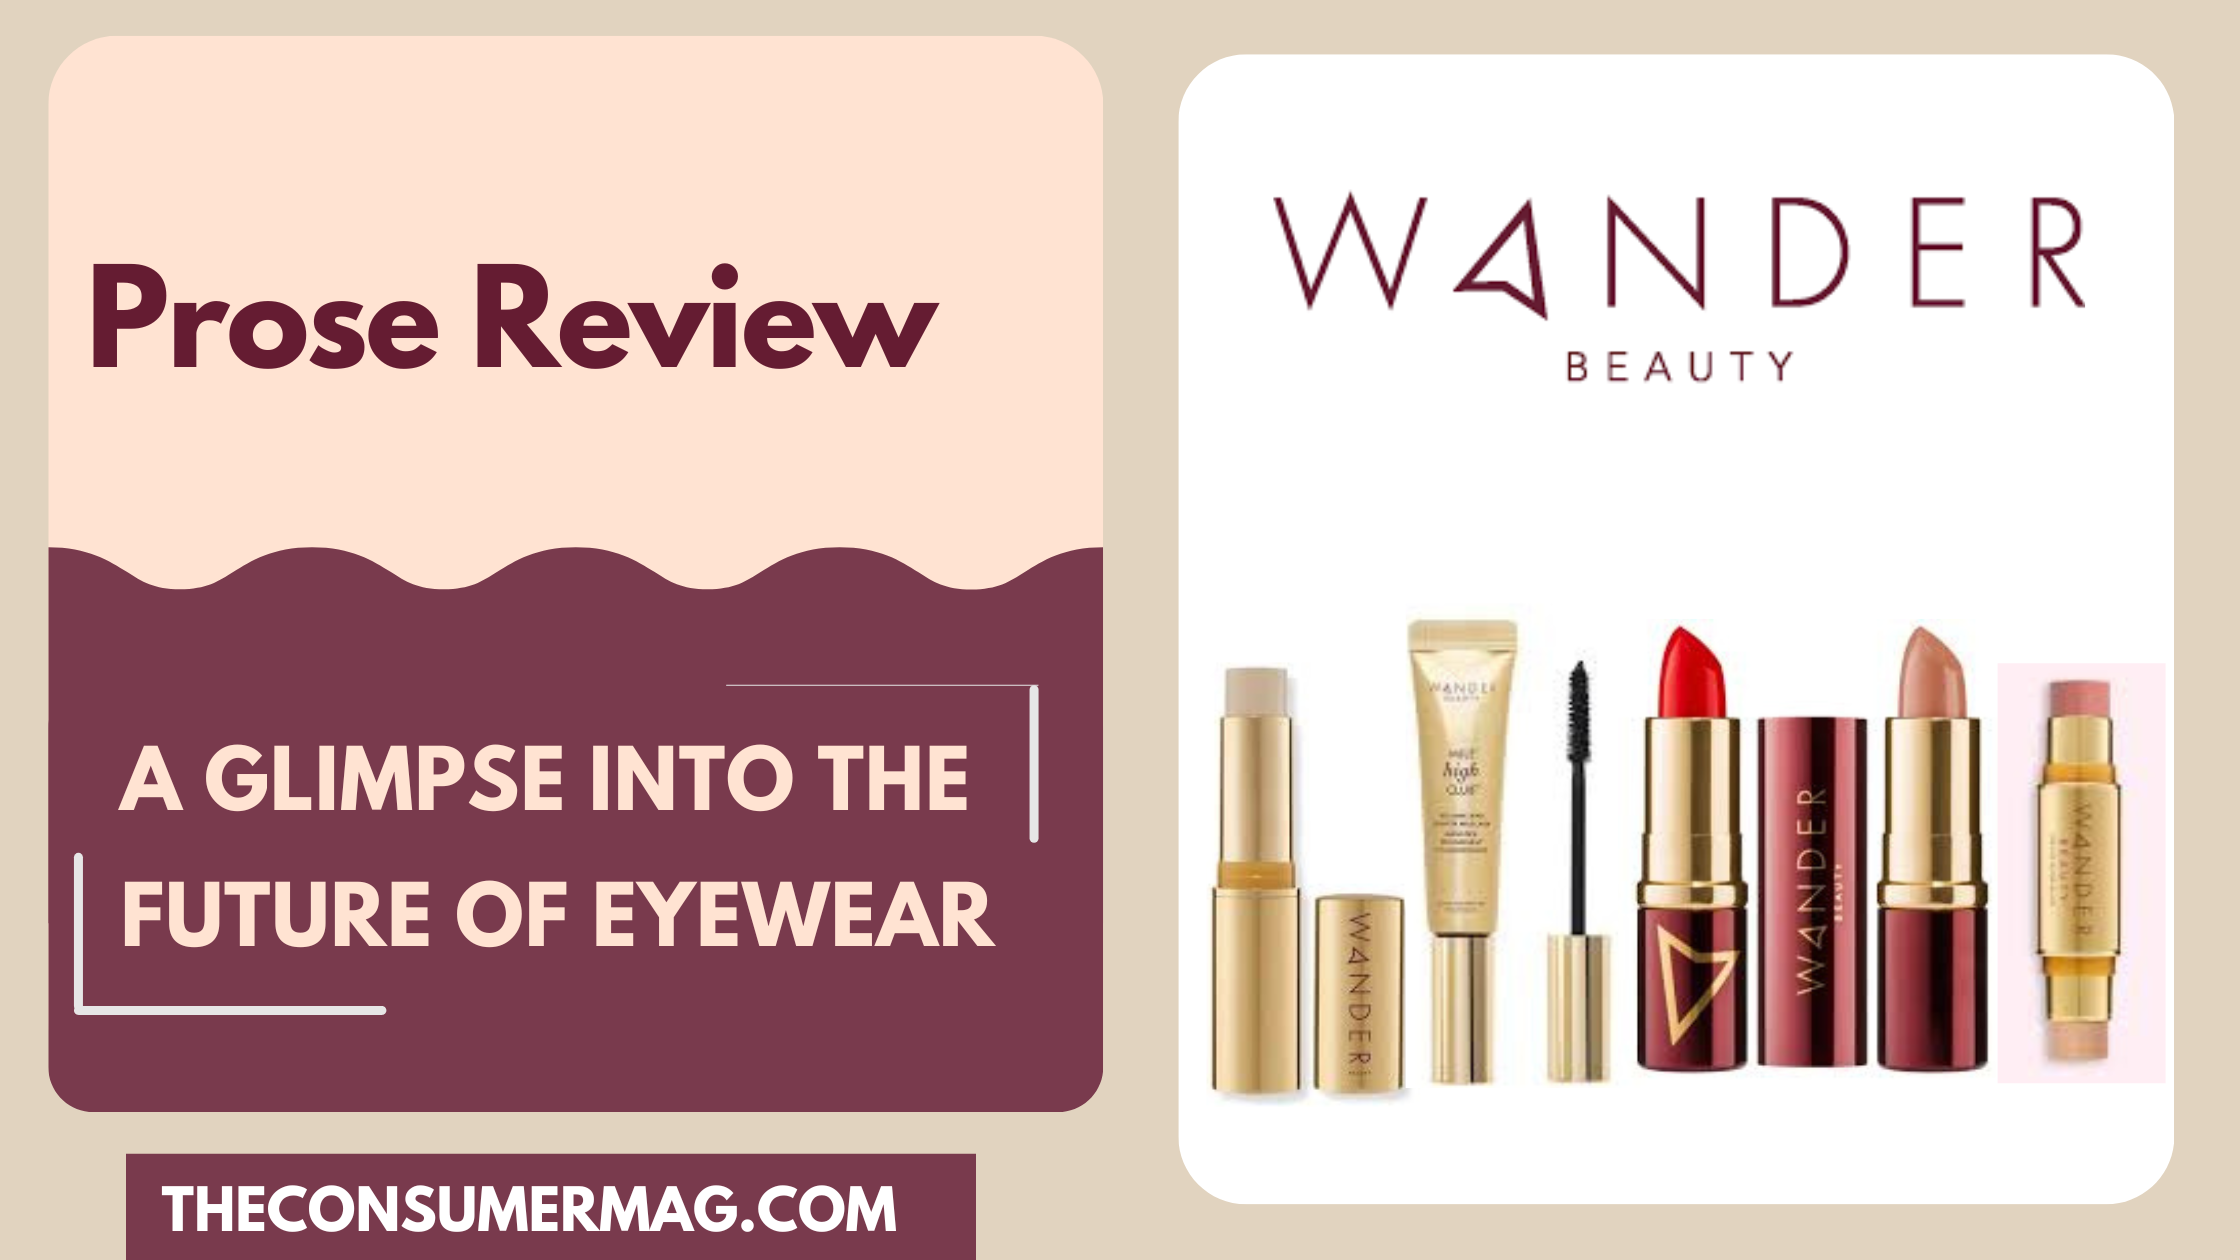 Wander Beauty featured image